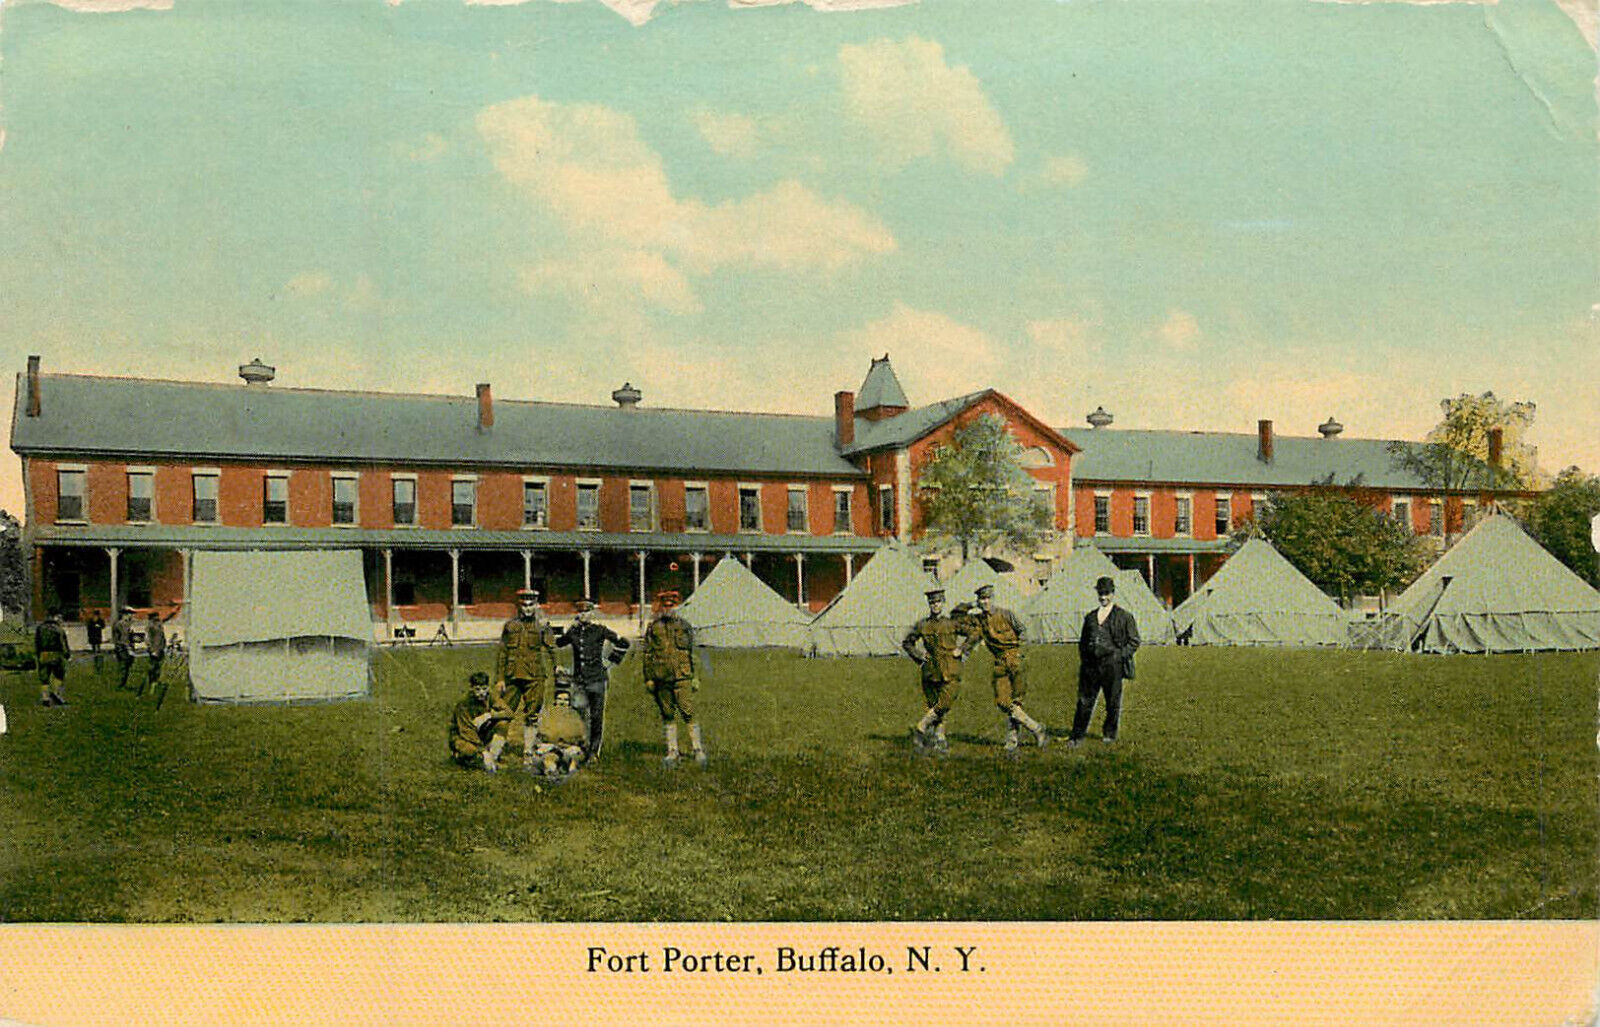 WWI US Army Postcard Fort Porter Buffalo NY Tents on Parade Ground 1915